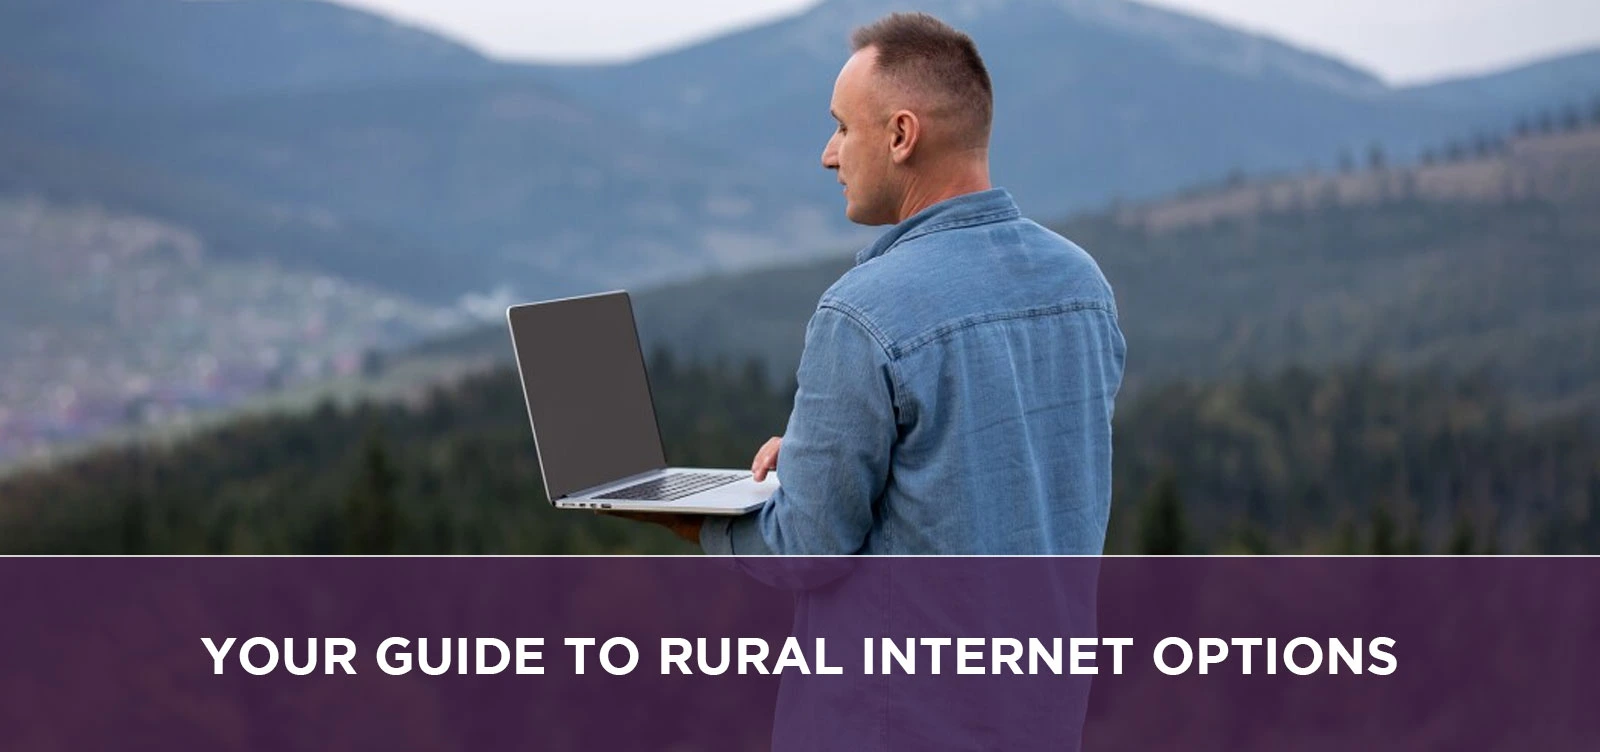 Your Guide to Rural Internet Options